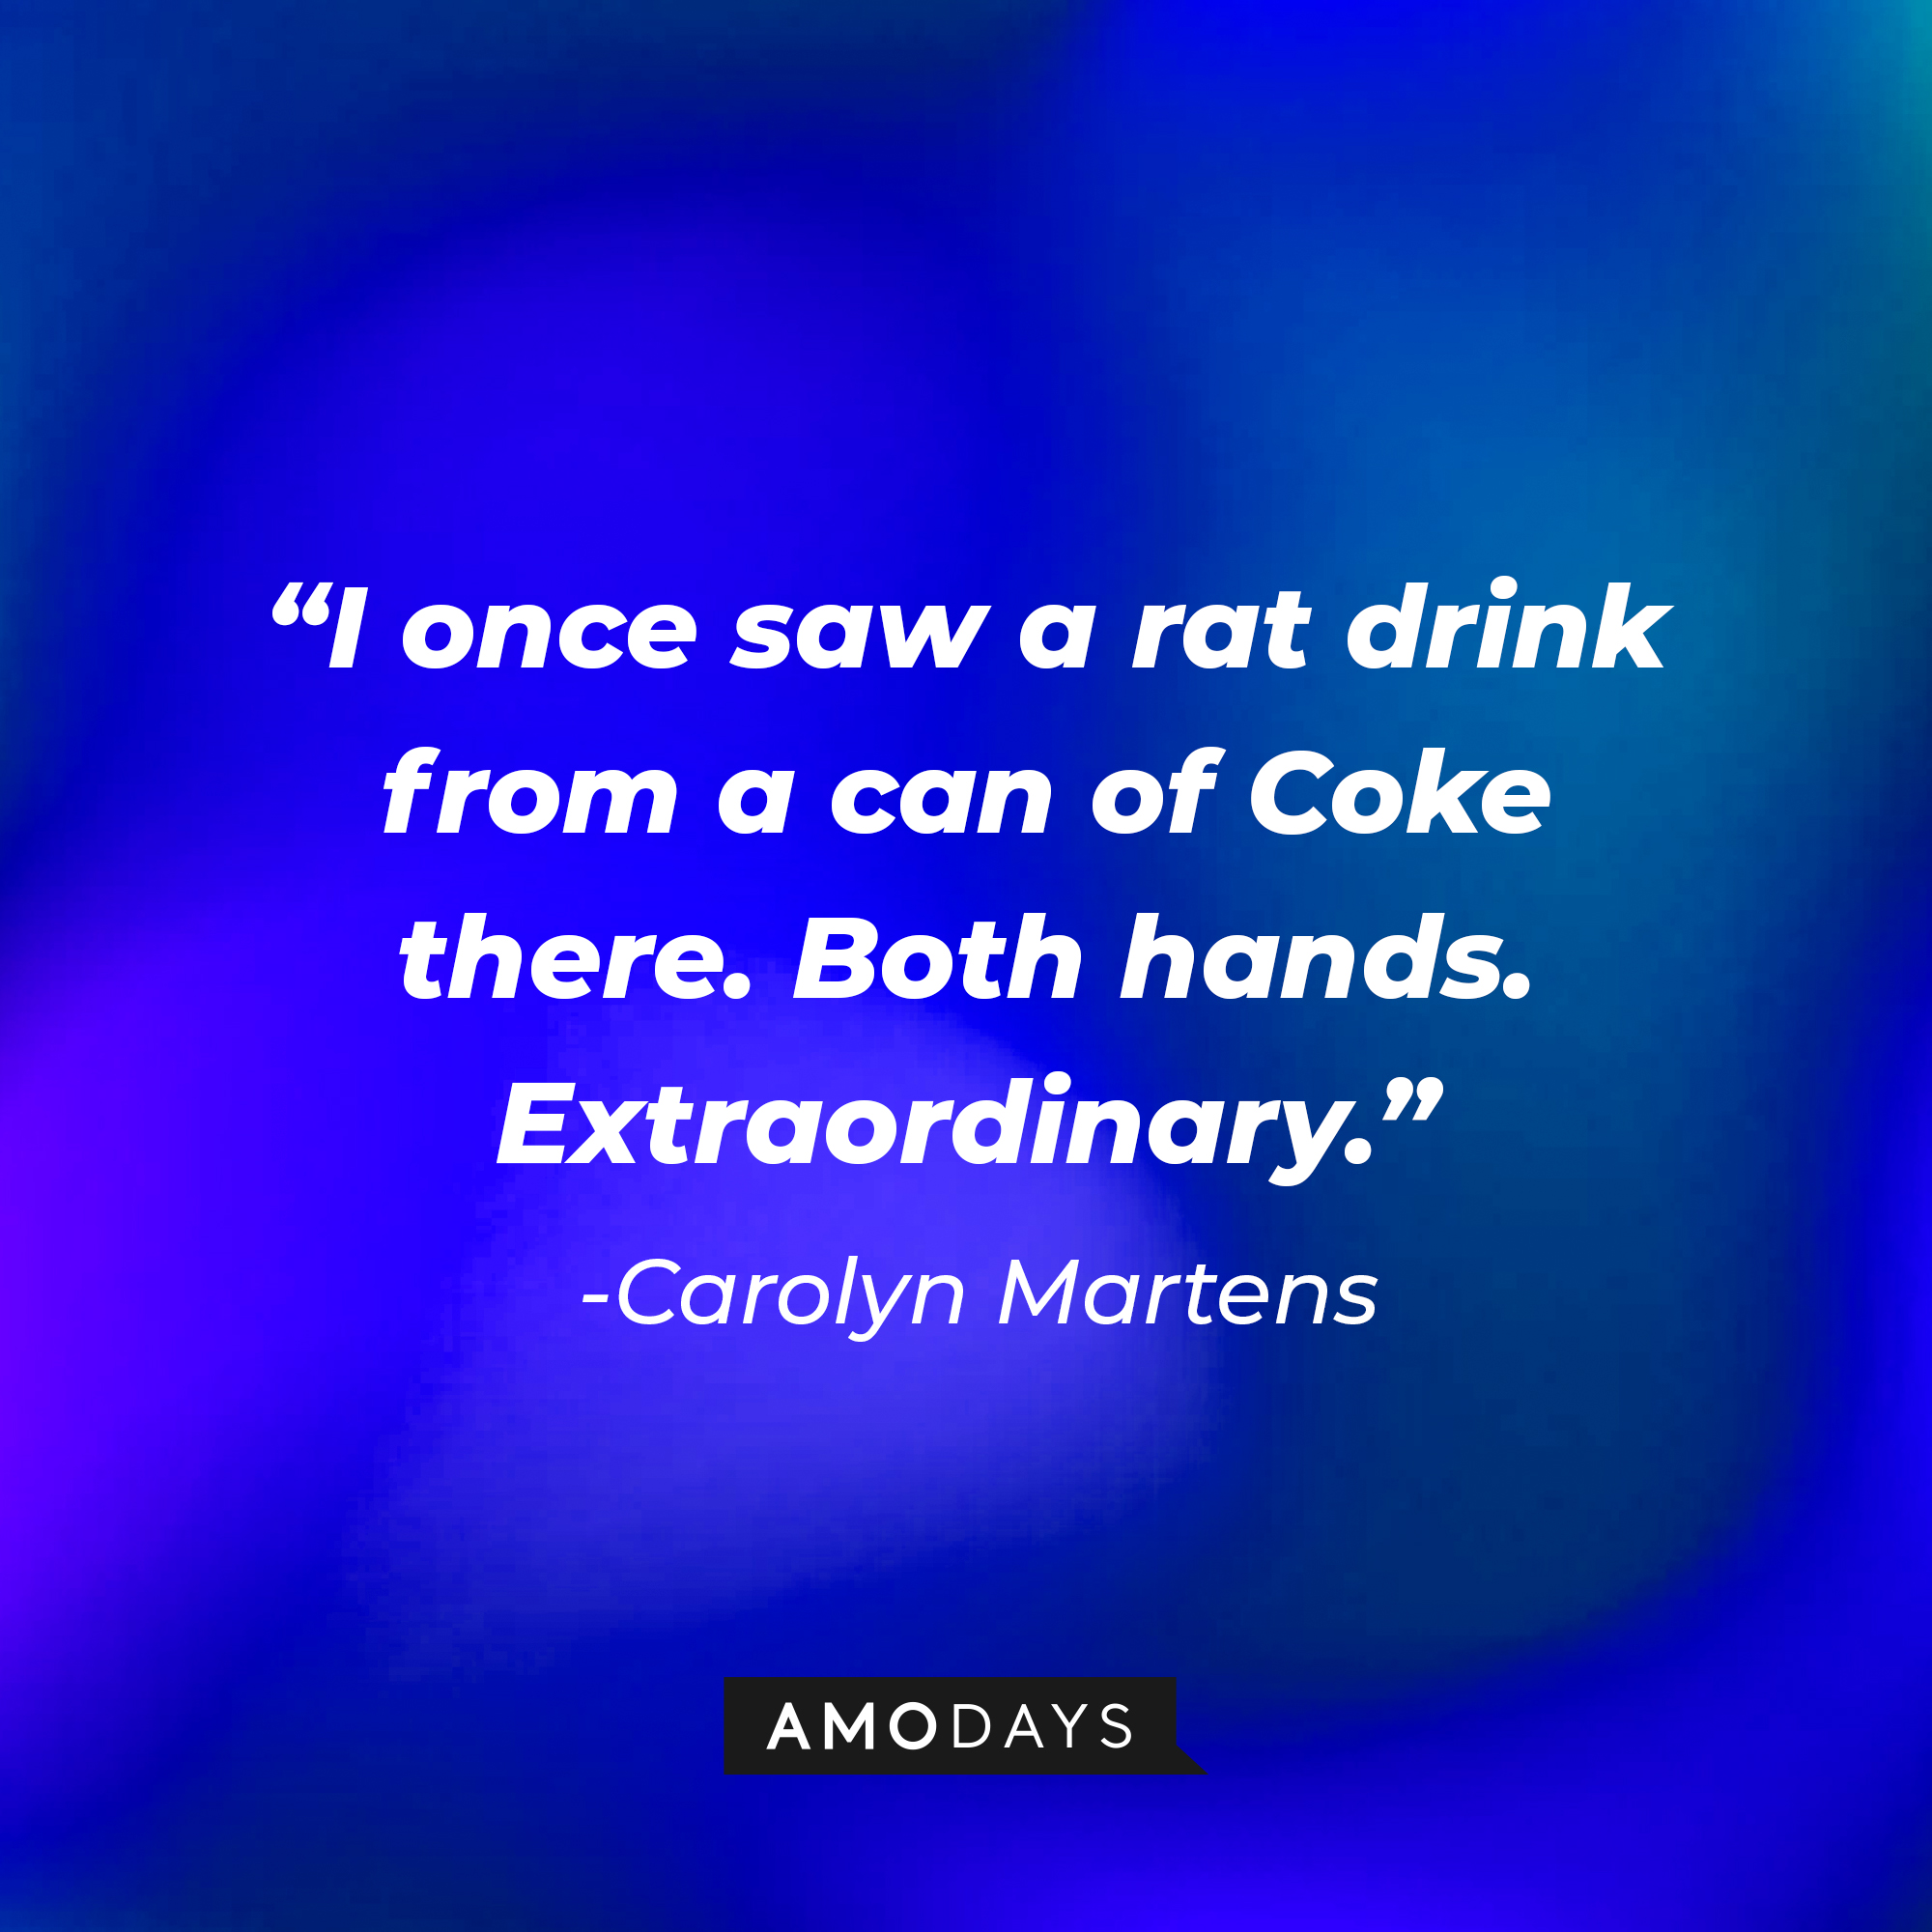 Carolyn Martens’s quote: “I once saw a rat drink from a can of Coke there. Both hands. Extraordinary.” | Source: AmoDays